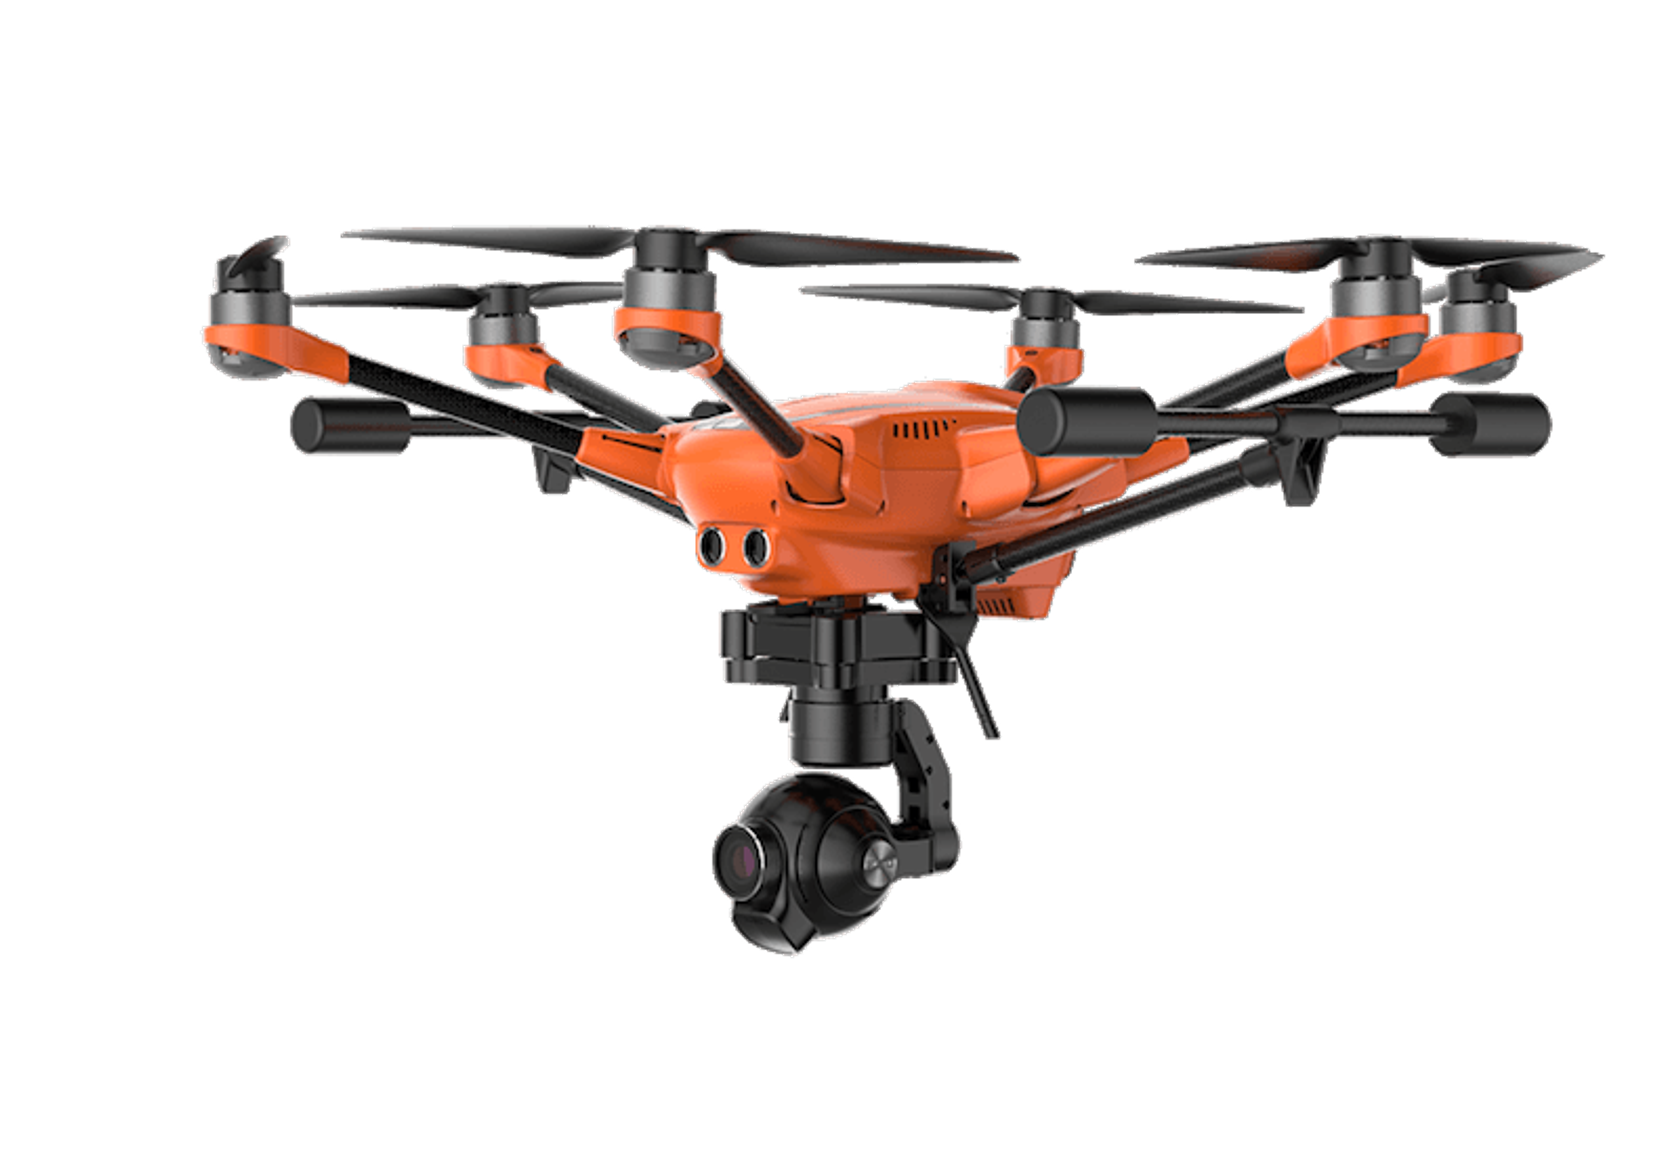 10 Best Aerial Photography Drones 2021. Videography Top Drone List